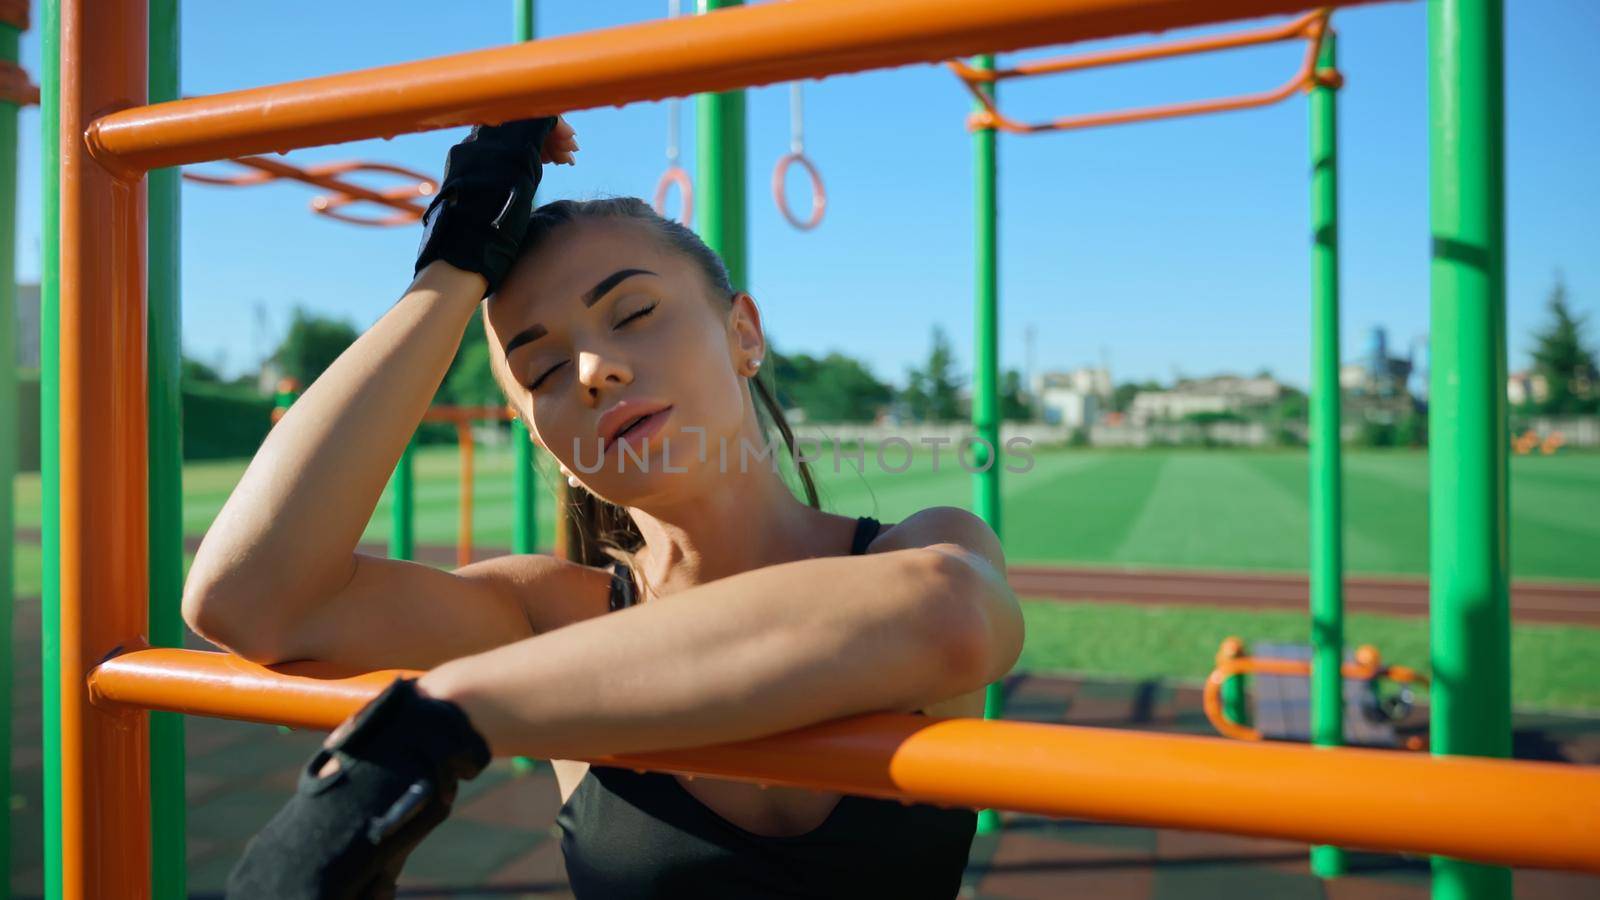 Young sexy woman with eyes closed posing near bars at sports ground in summer sunny day, touching face. Sportswoman with perfect makeup wearing fashionable outfit outdoors. Workout concept.